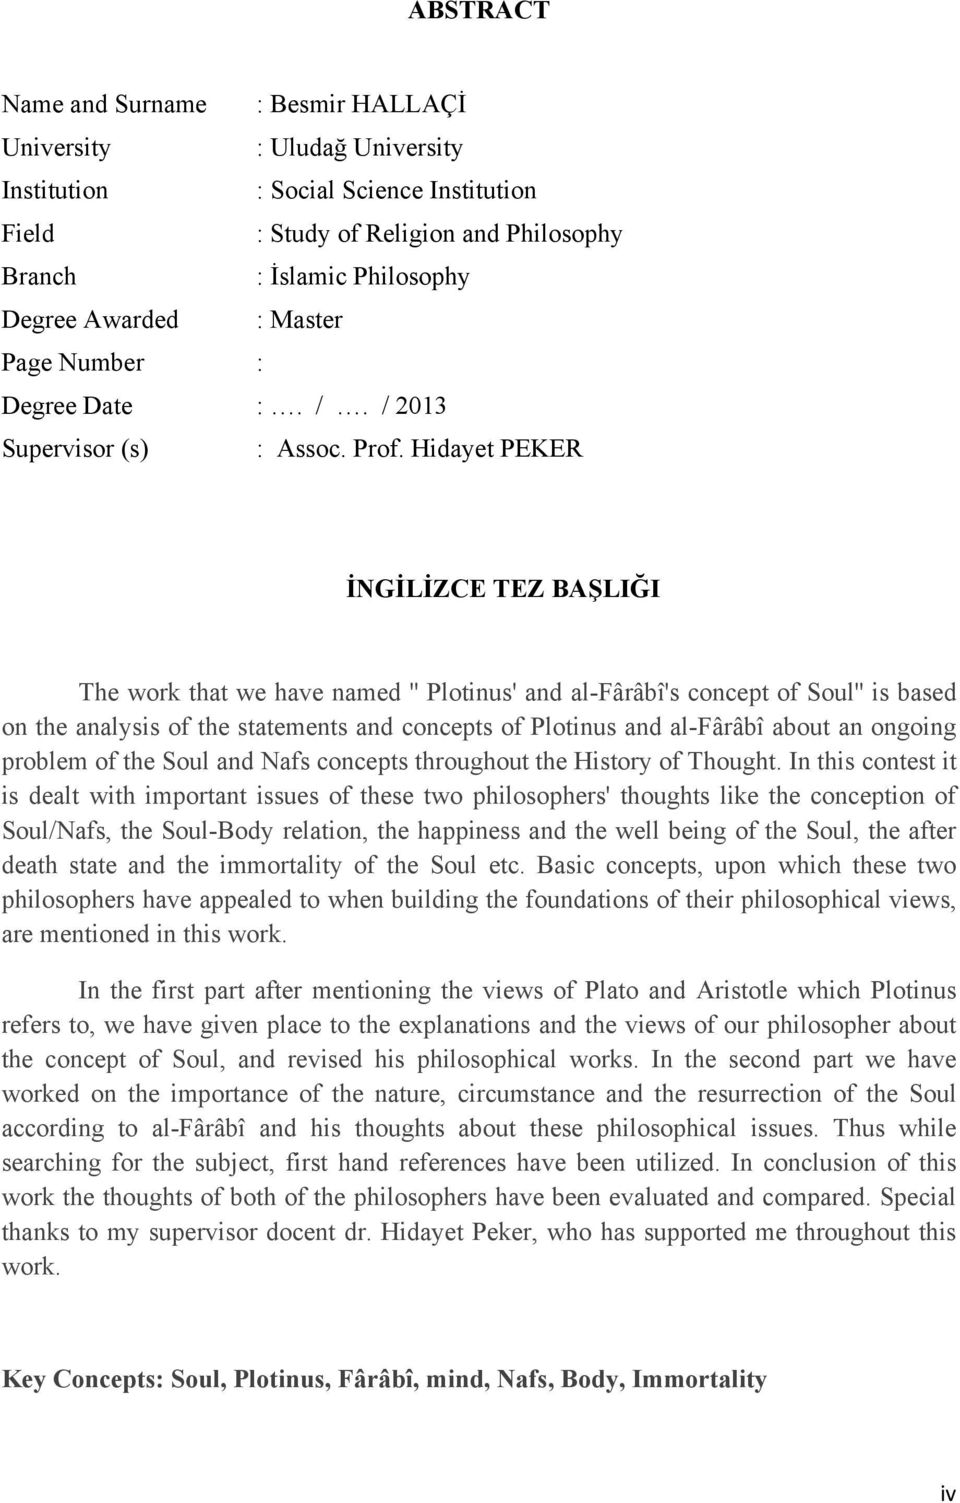 Hidayet PEKER İNGİLİZCE TEZ BAŞLIĞI The work that we have named '' Plotinus' and al-fârâbî's concept of Soul'' is based on the analysis of the statements and concepts of Plotinus and al-fârâbî about